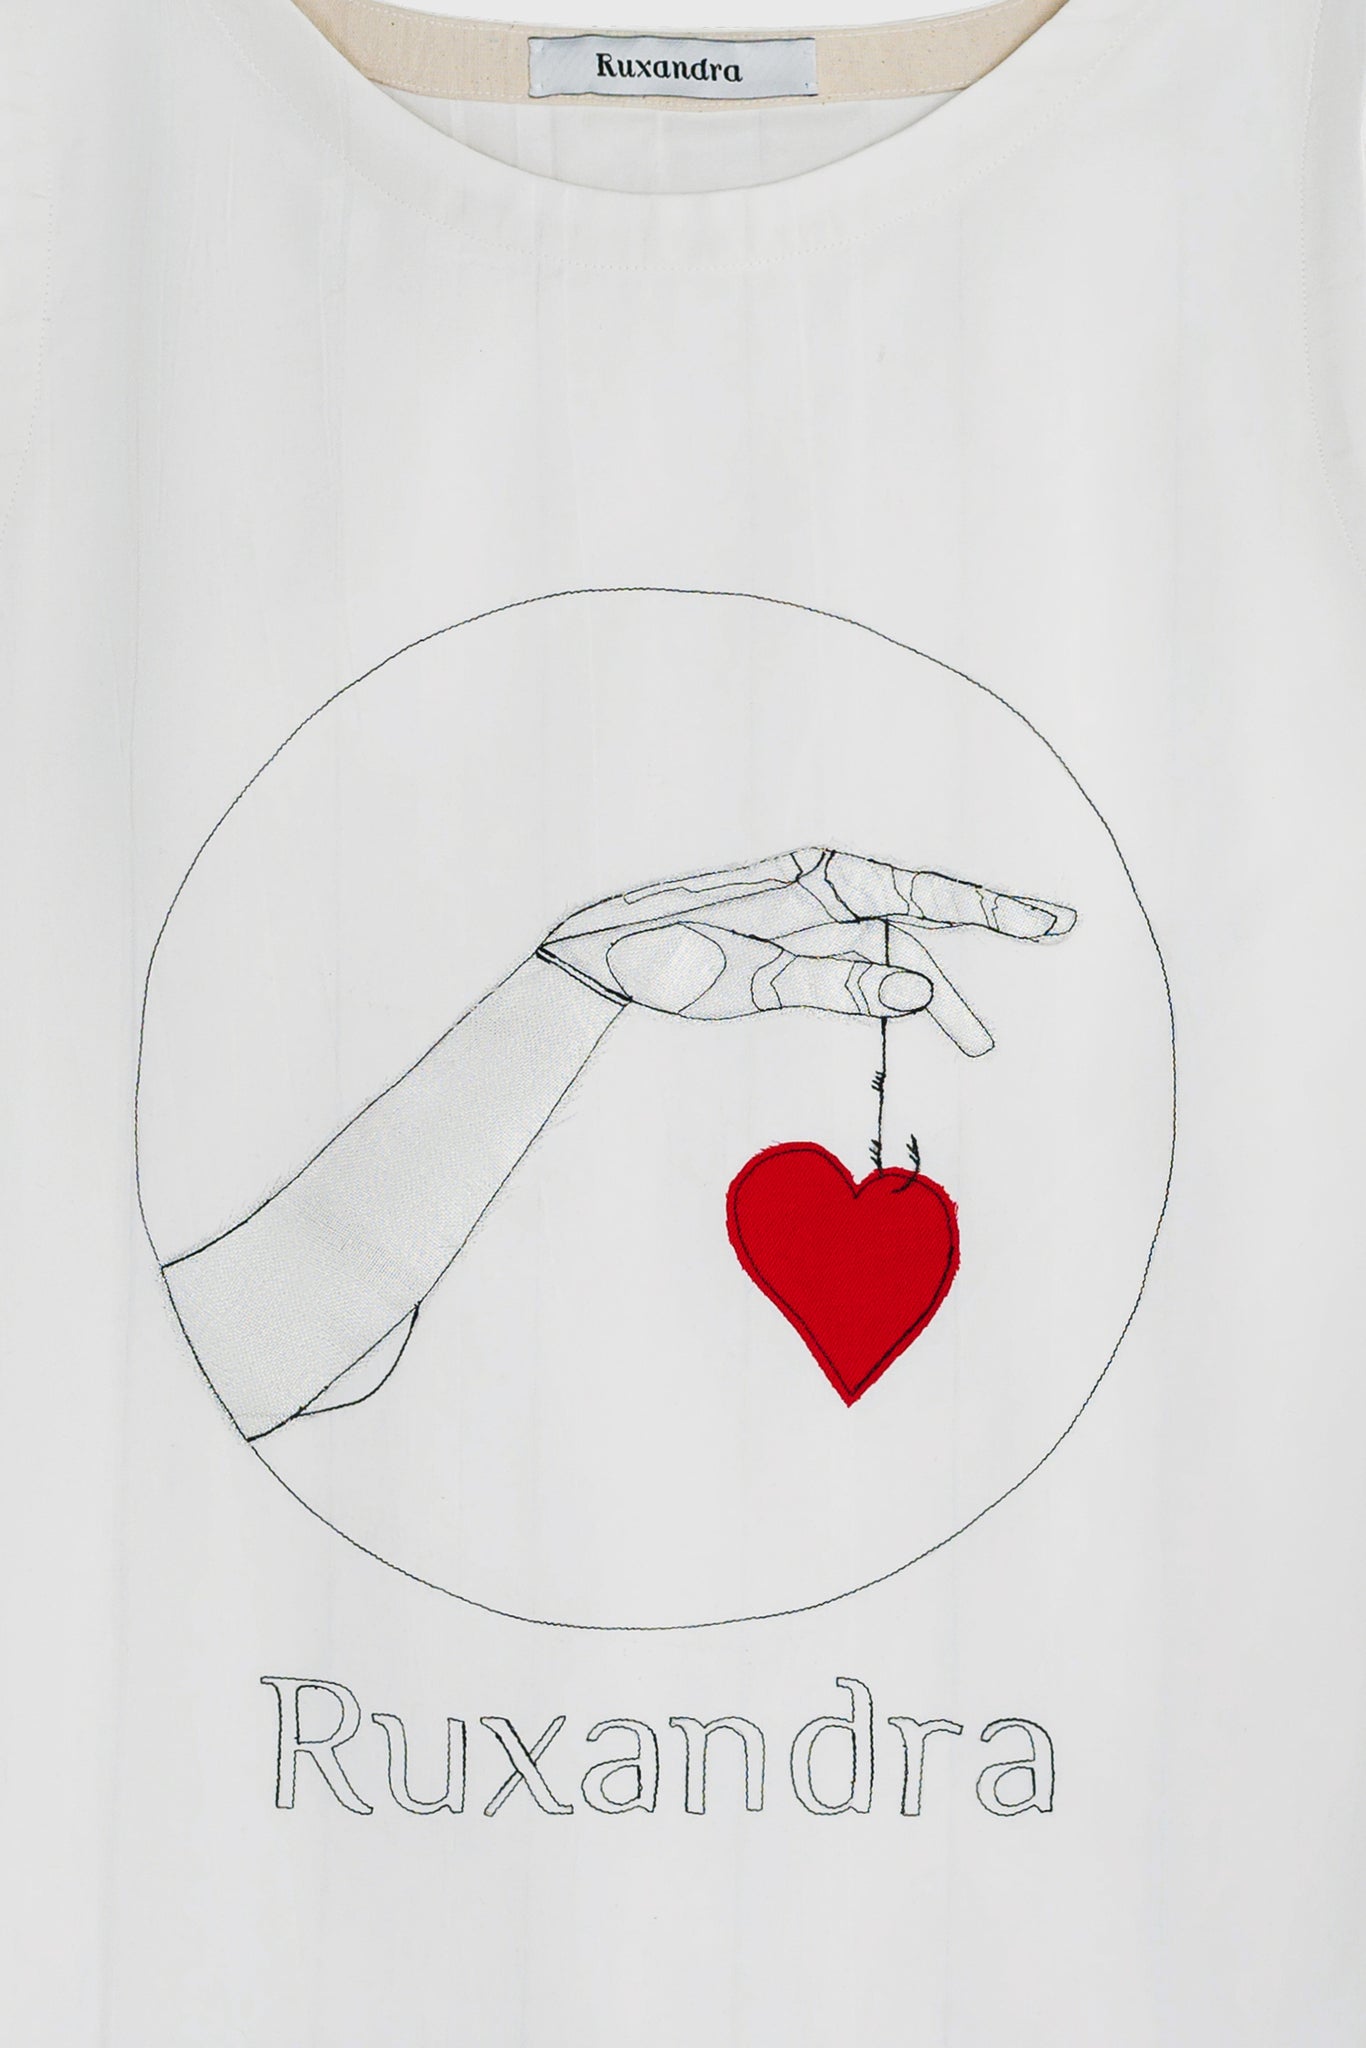 T-shirt, beautiful hand embroidery, love message, for romantics, for women with taste.